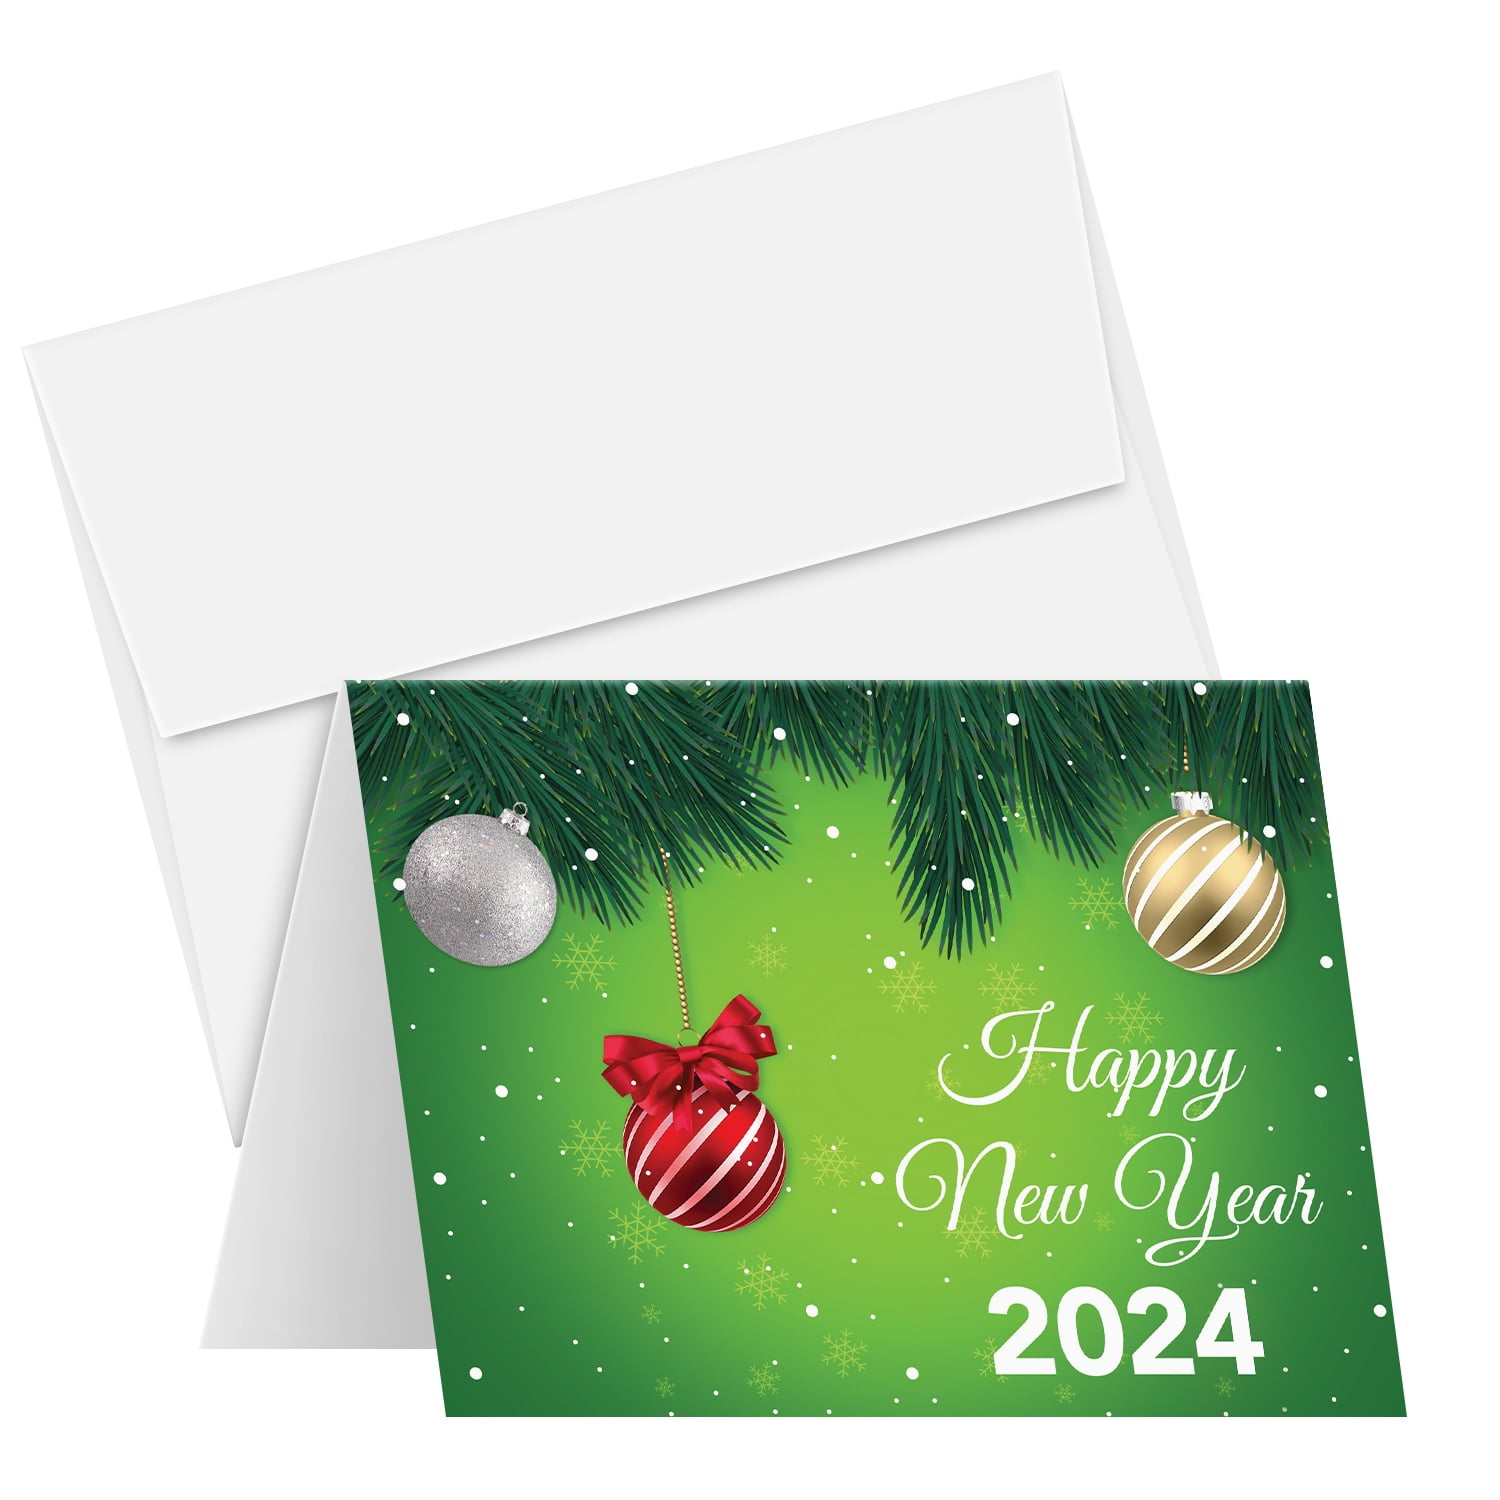 A2 Green Blank Greeting Cards with Green Envelopes – Great for Holiday,  Christmas and New Year Greetings, Invitations, and Thank You Cards | 4.25”  x